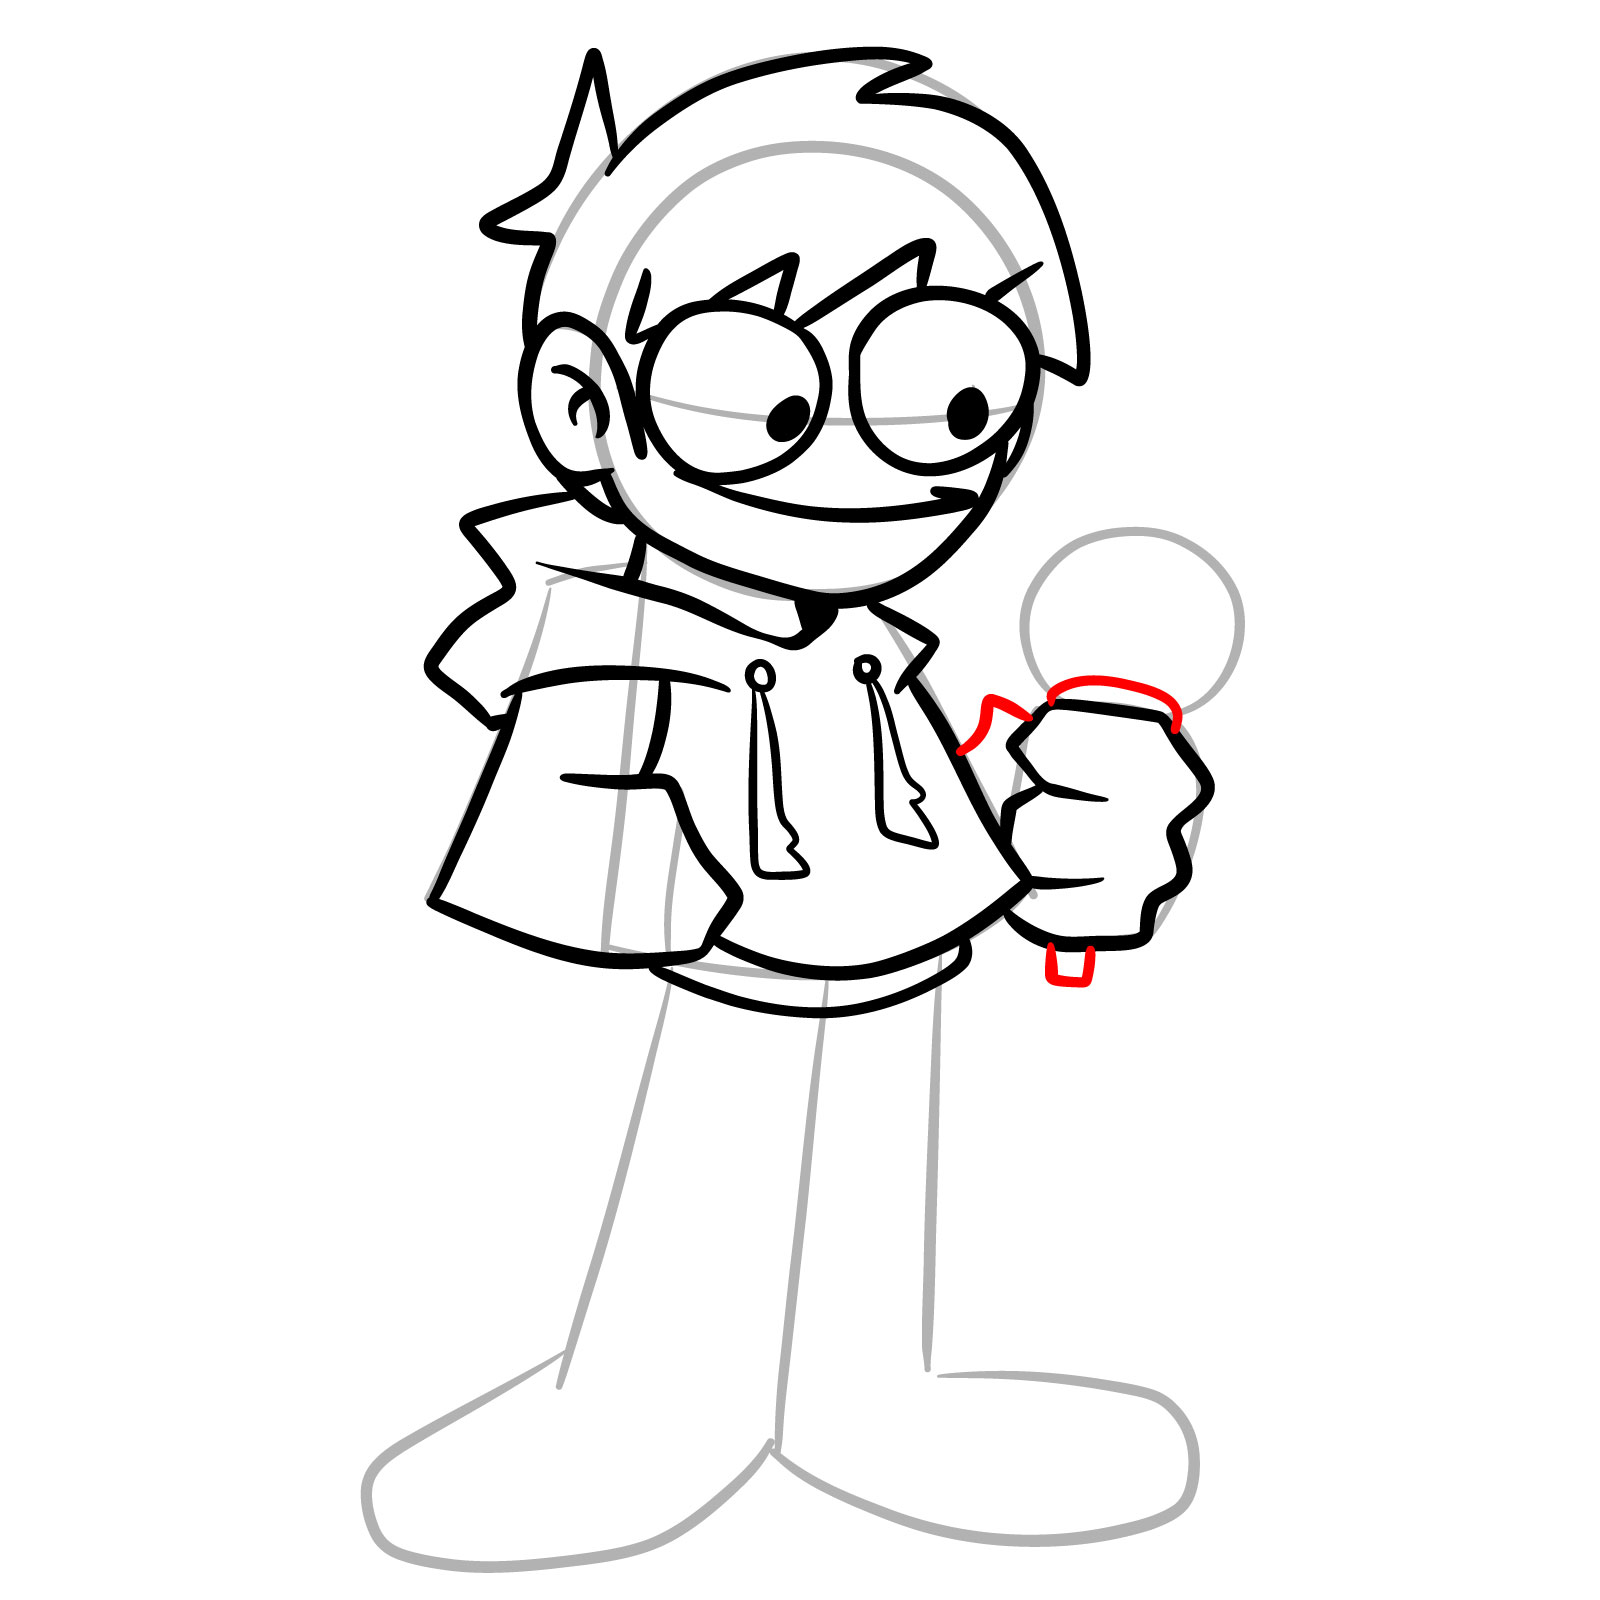 How to draw Edd from Online Vs - step 18